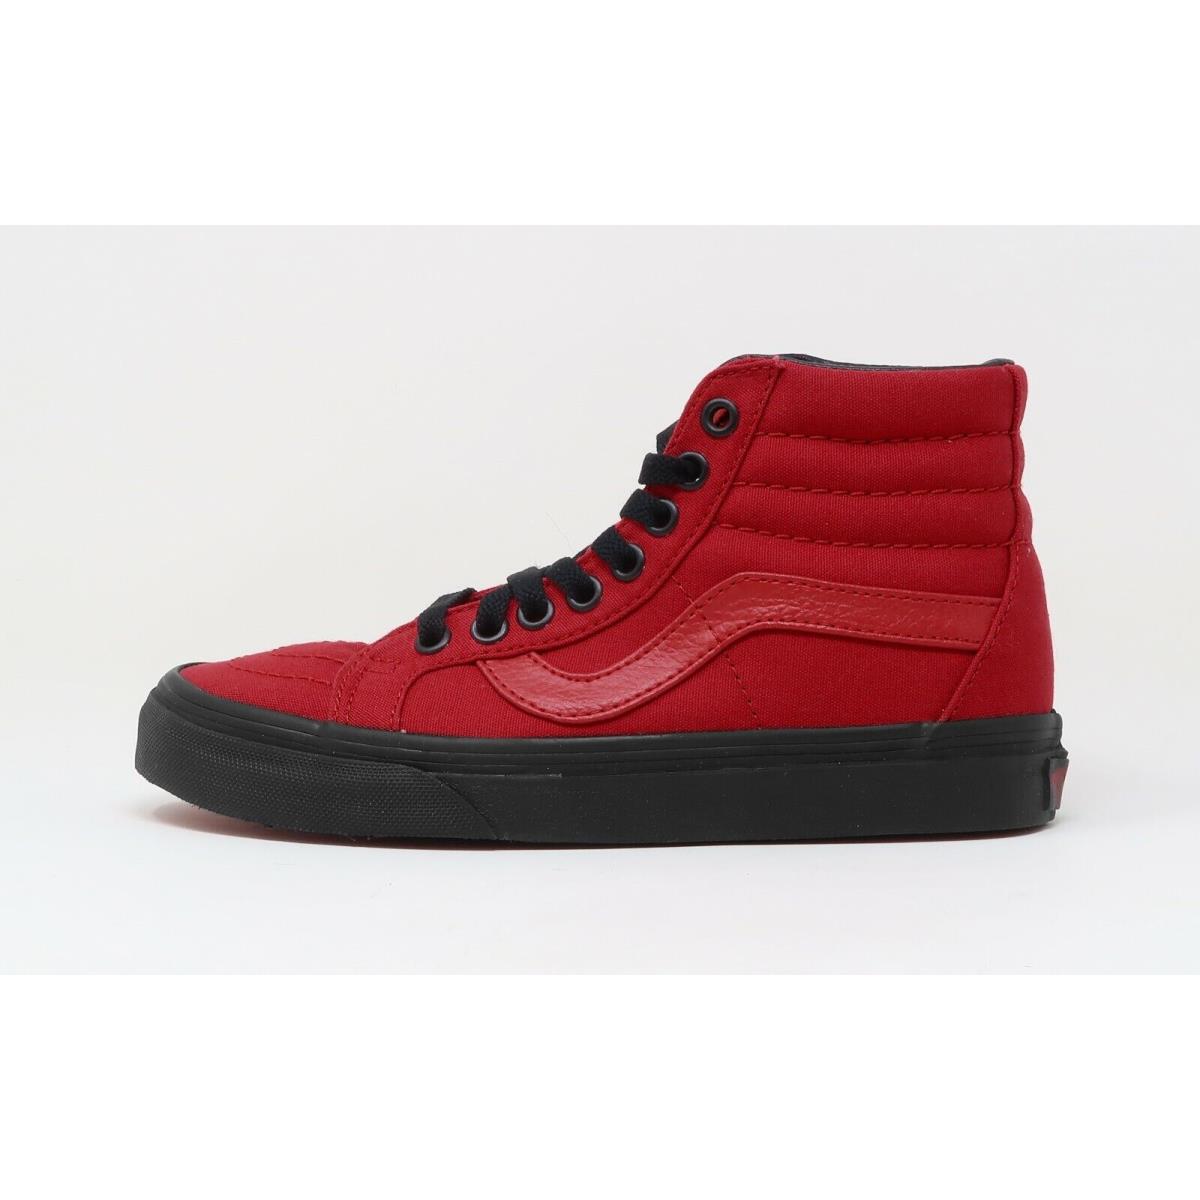 Vans SK8-Hi Reissue Black Outsole Racing Red Canvas Women Girls Shoes Sneakers